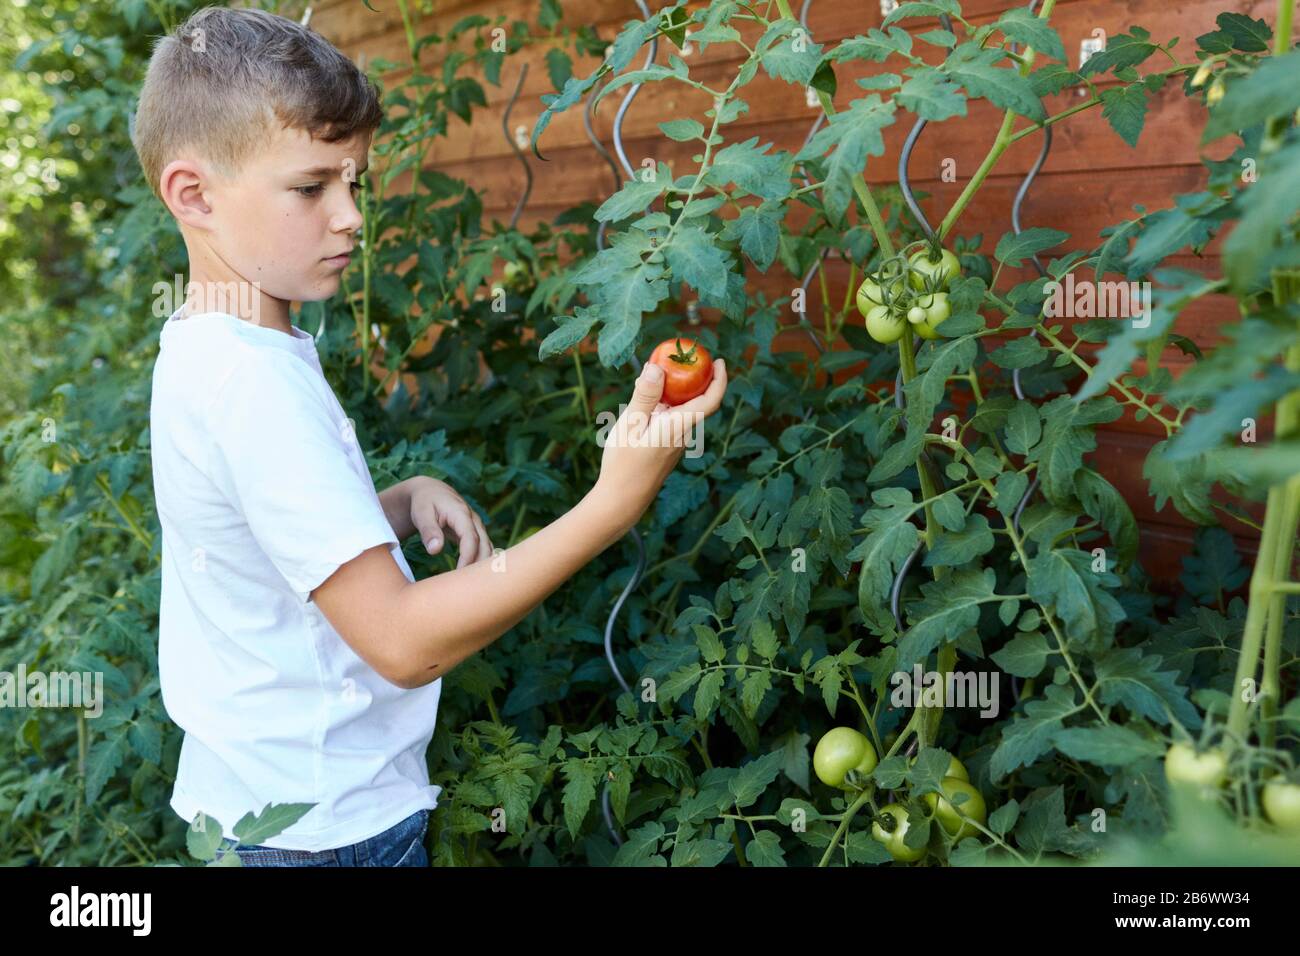 Children investigating food. A boy picks tomatoes to make ketchup. Learning according to the Reggio Pedagogy principle, playful understanding and discovery. Germany. Stock Photo